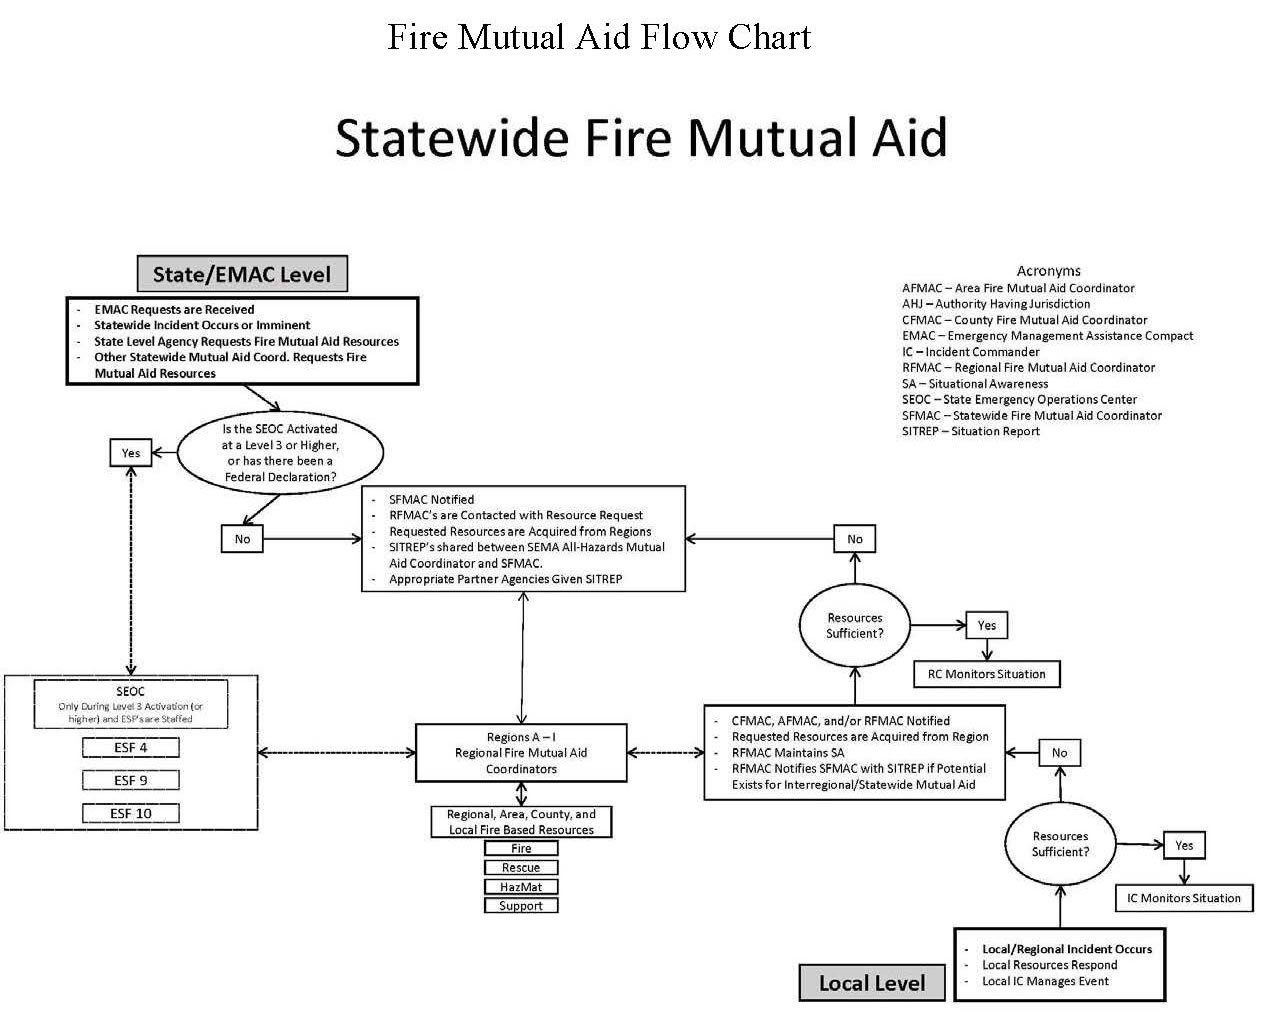 image of mutual aid flowchart that shows the process of requesting EMAC or Federal resources